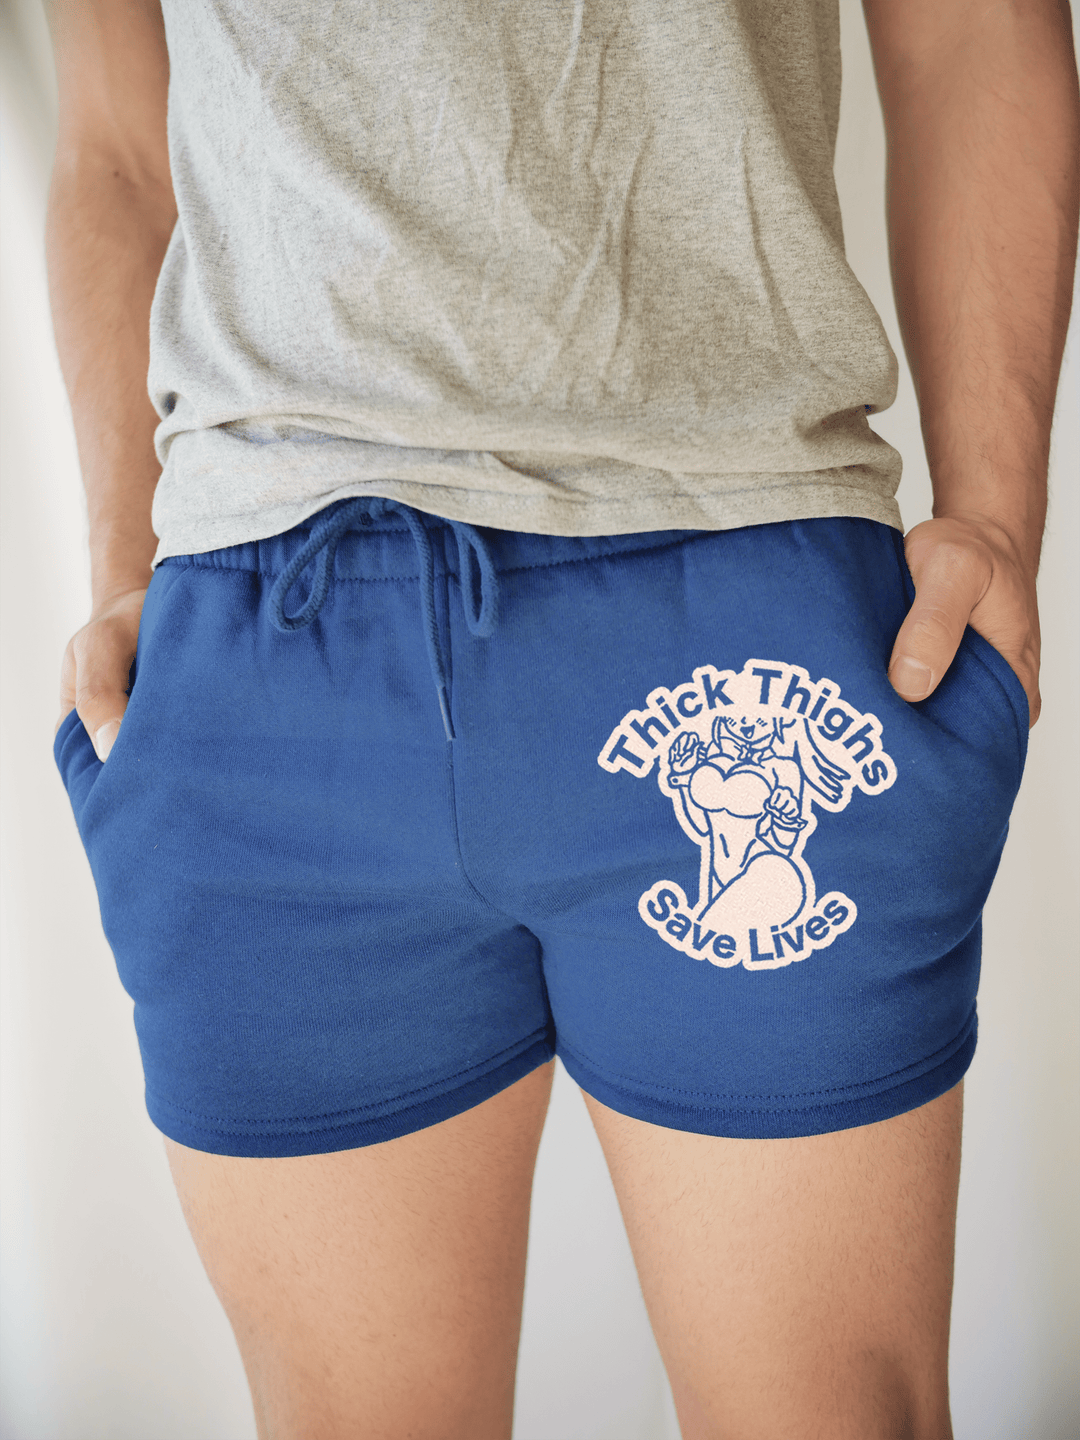 PixelThat Punderwear Shorts Royal Blue / S / Front Thick Thighs Save Lives Men's Gym Shorts